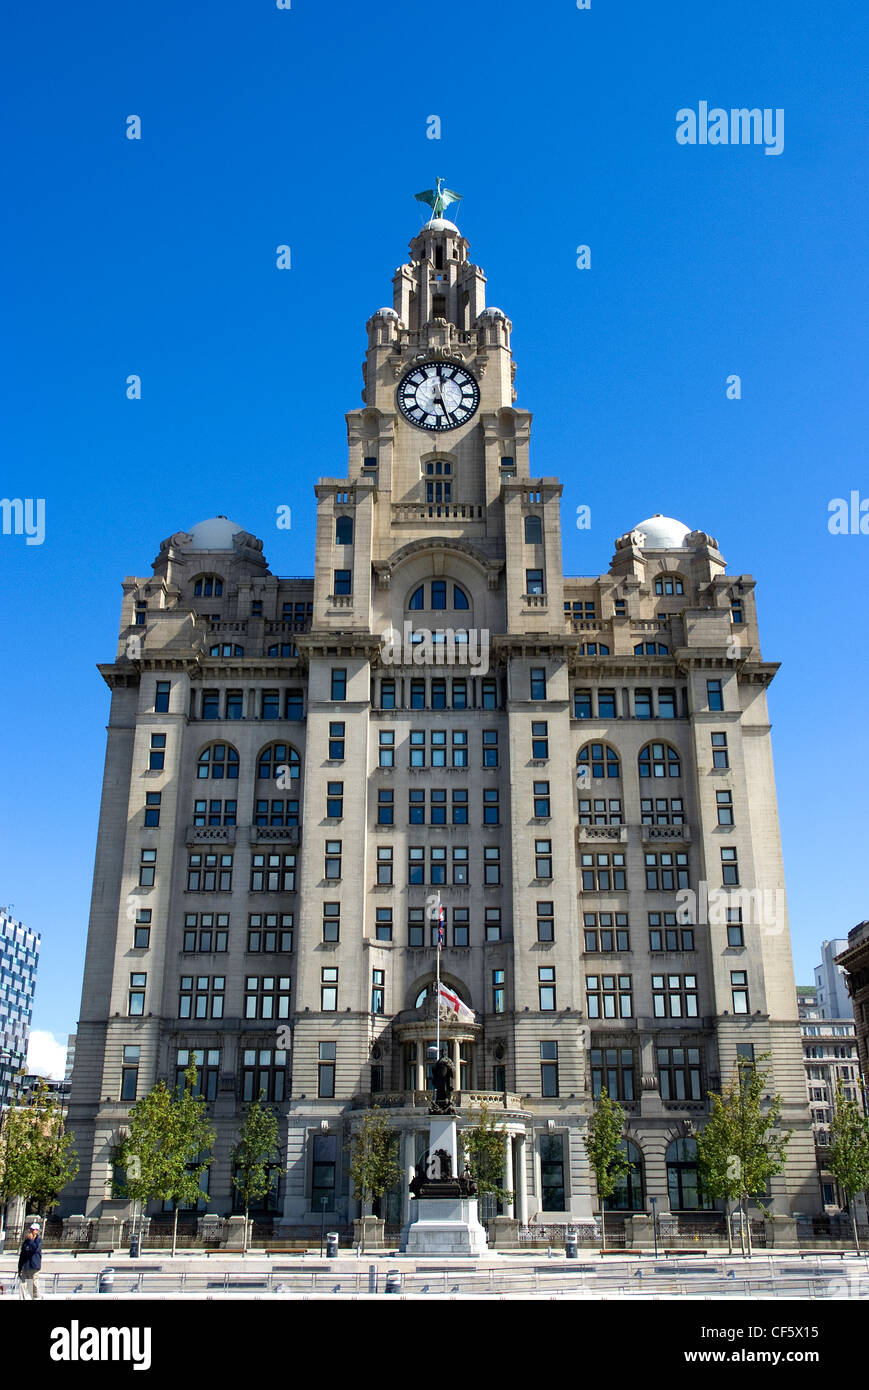 The Royal Liver Building on the Pier Head in Liverpool. It is one of Liverpool's Three Graces. Stock Photo